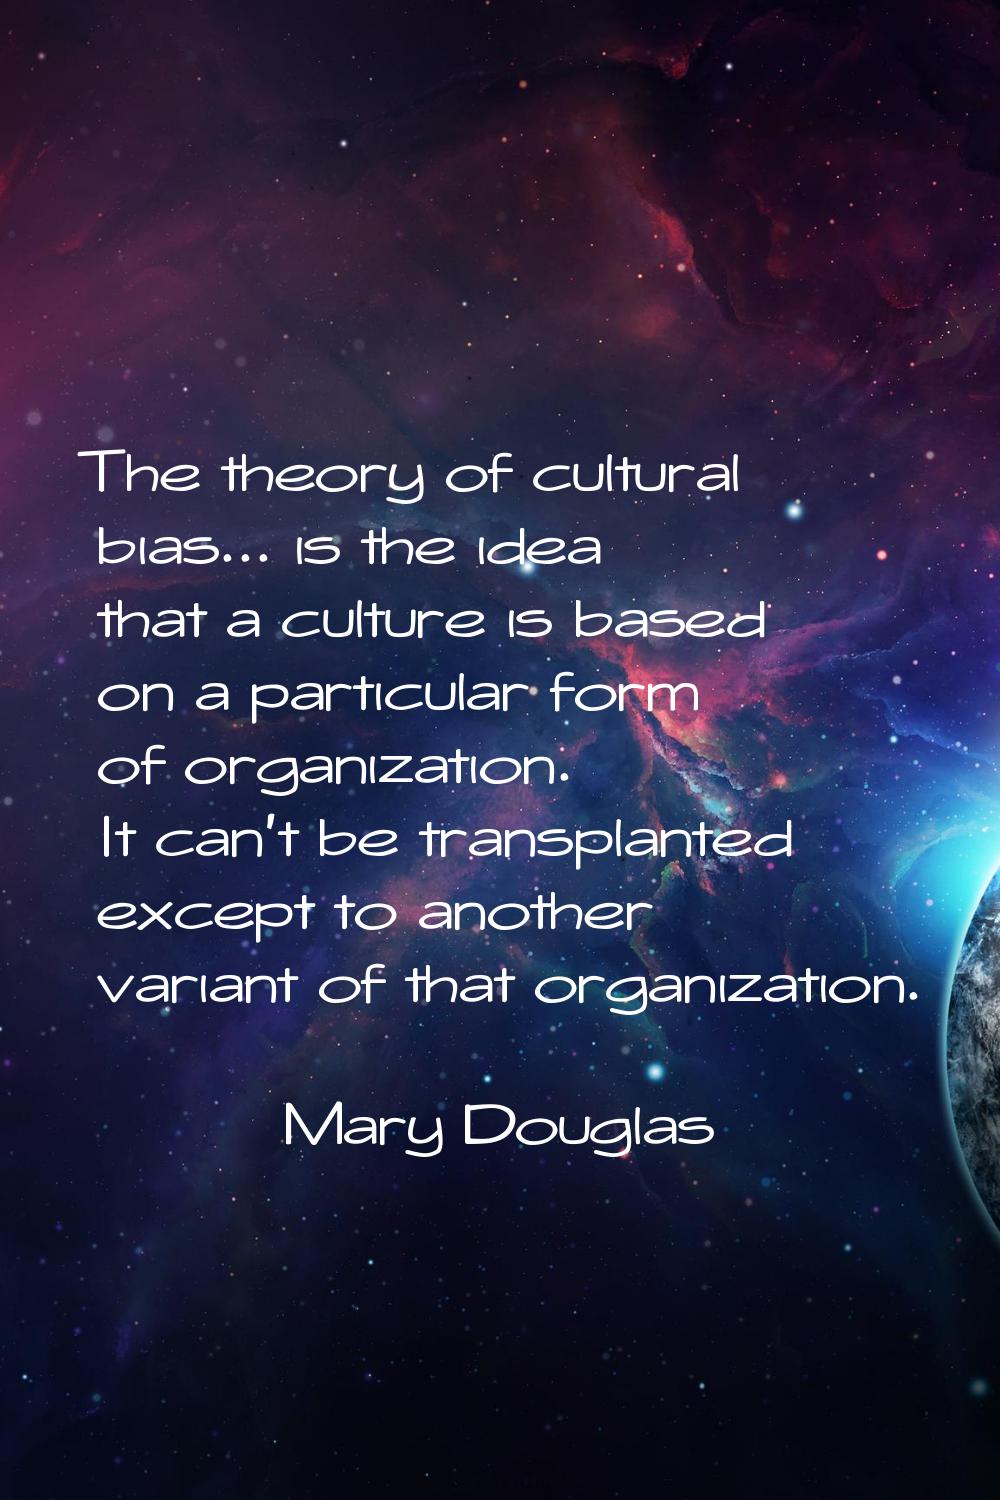 The theory of cultural bias... is the idea that a culture is based on a particular form of organiza